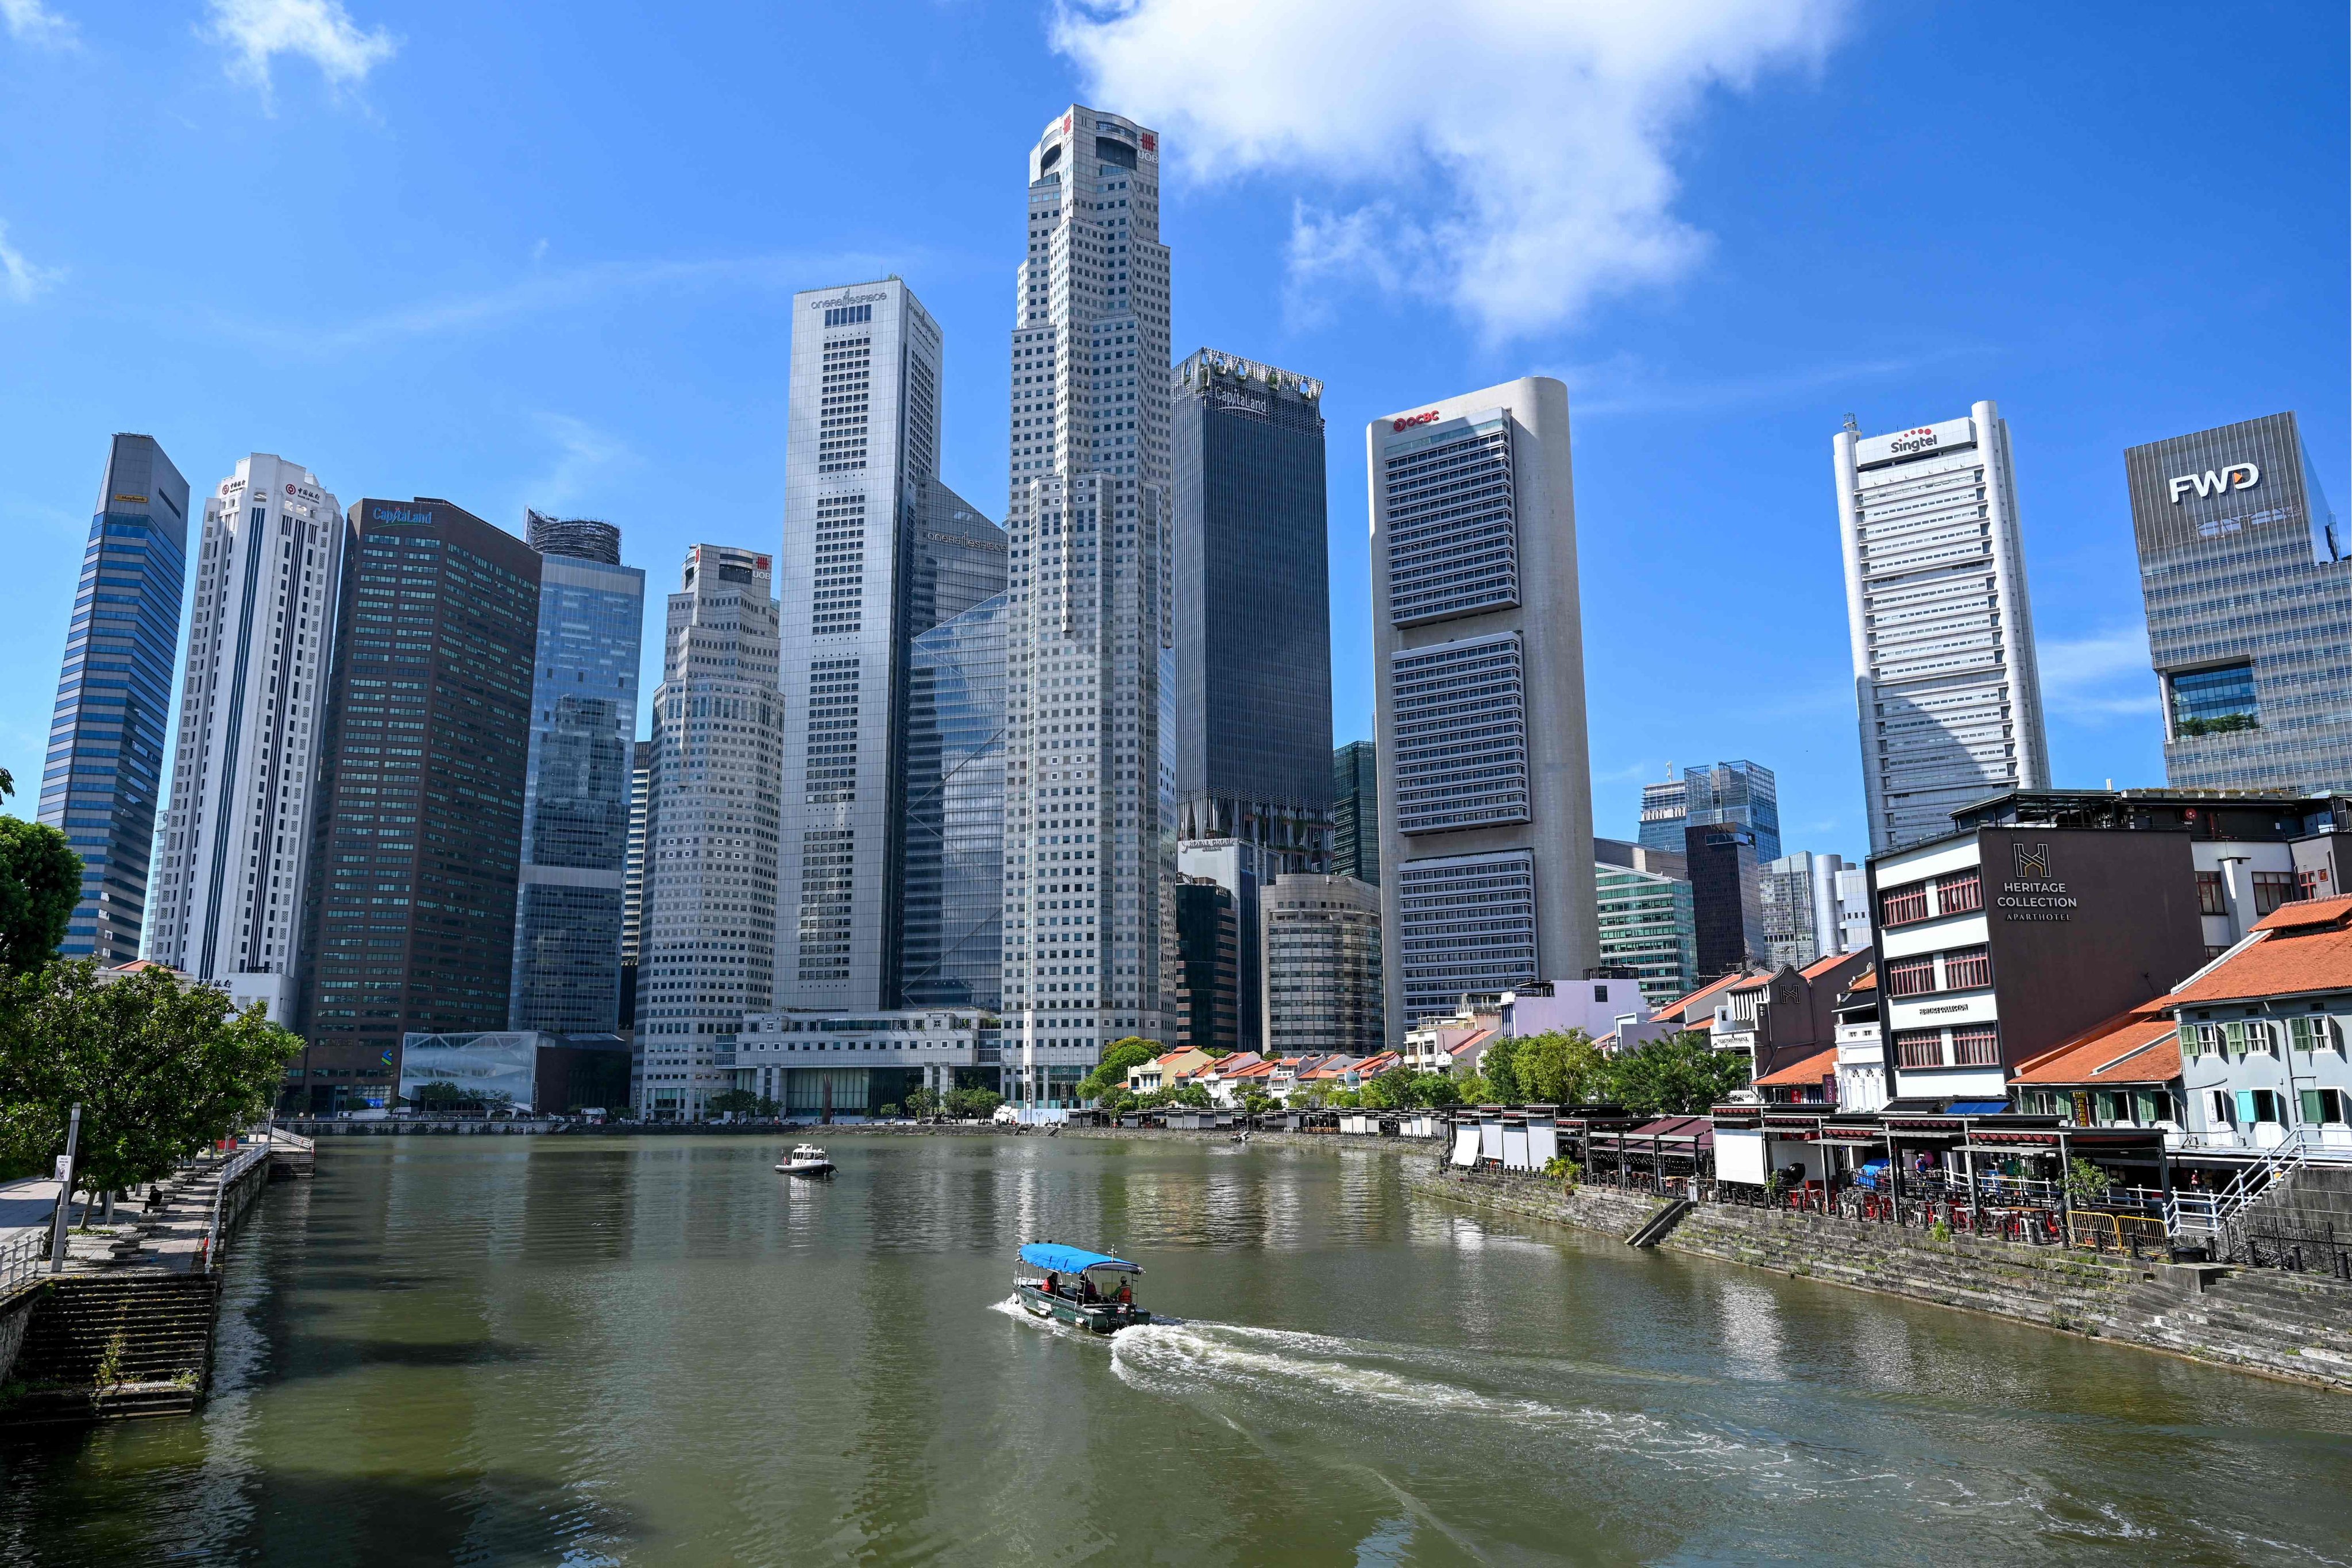 A boat cruises on the water in Singapore’s central financial business district. A man was sentenced to 12 months’ jail for multiple offences including hitting his wife at a hospital. Photo: AFP